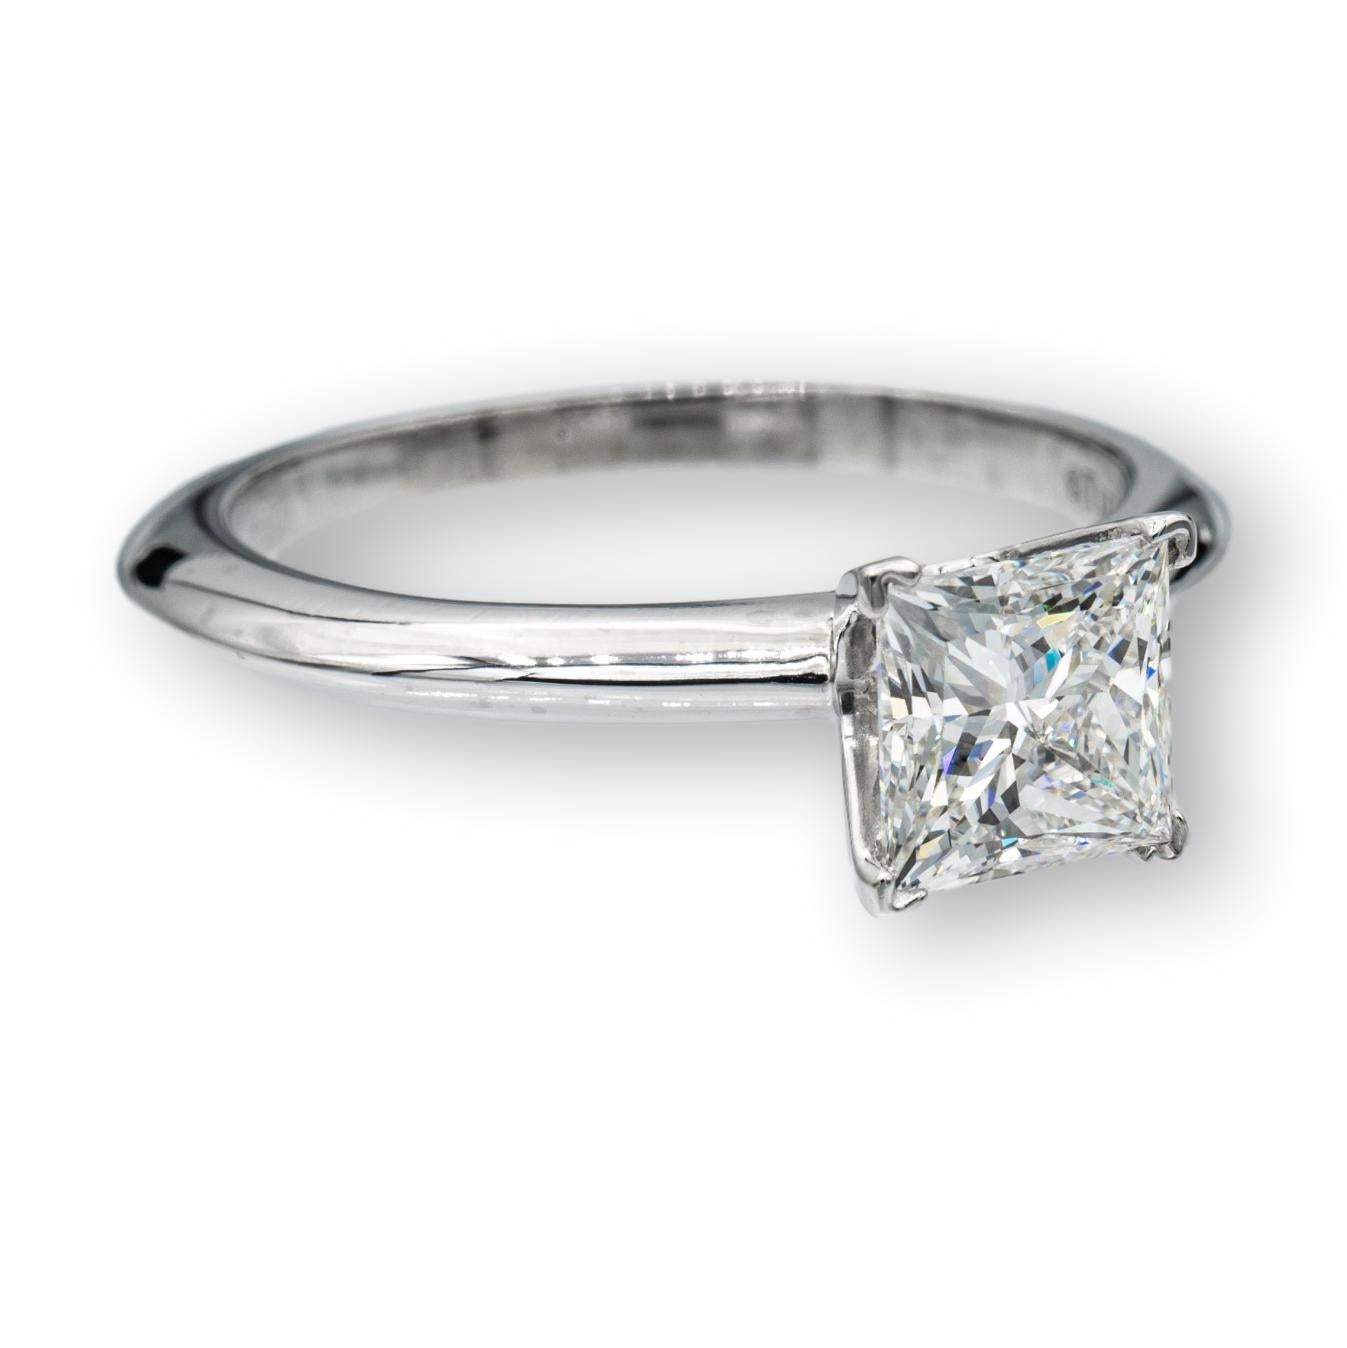 Tiffany & Co. Diamond Engagement ring featuring a princess cut 0.97 ct Center, graded F color , and VVS1 Clarity, in Platinum.    This diamond Includes a GIA certificate with report number  2225288728. The Tiffany Crown Inscription is confirmed on